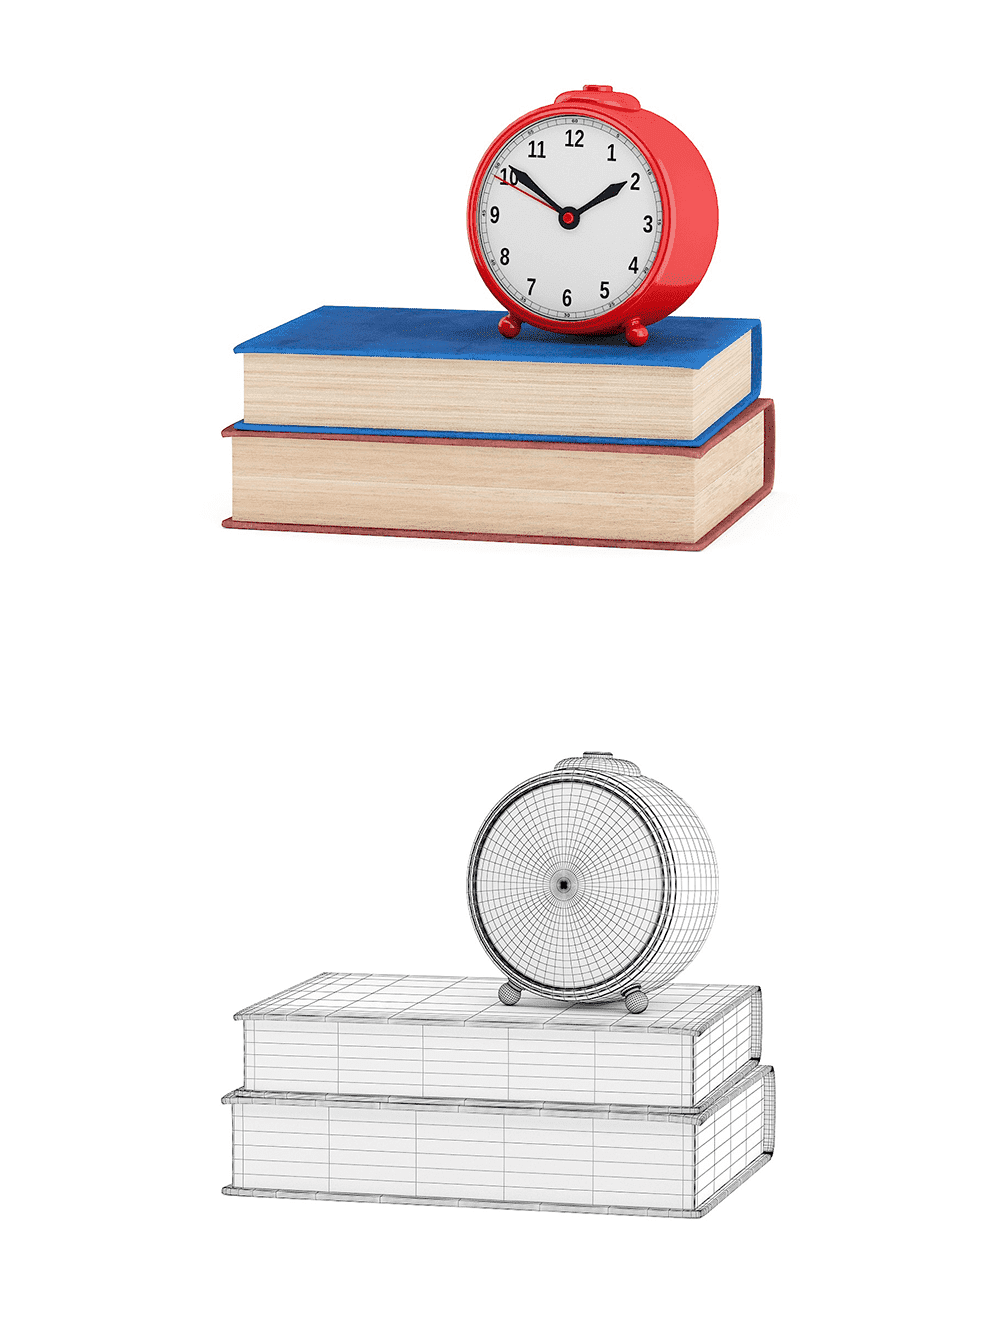 Clock and two books, picture for pinterest.